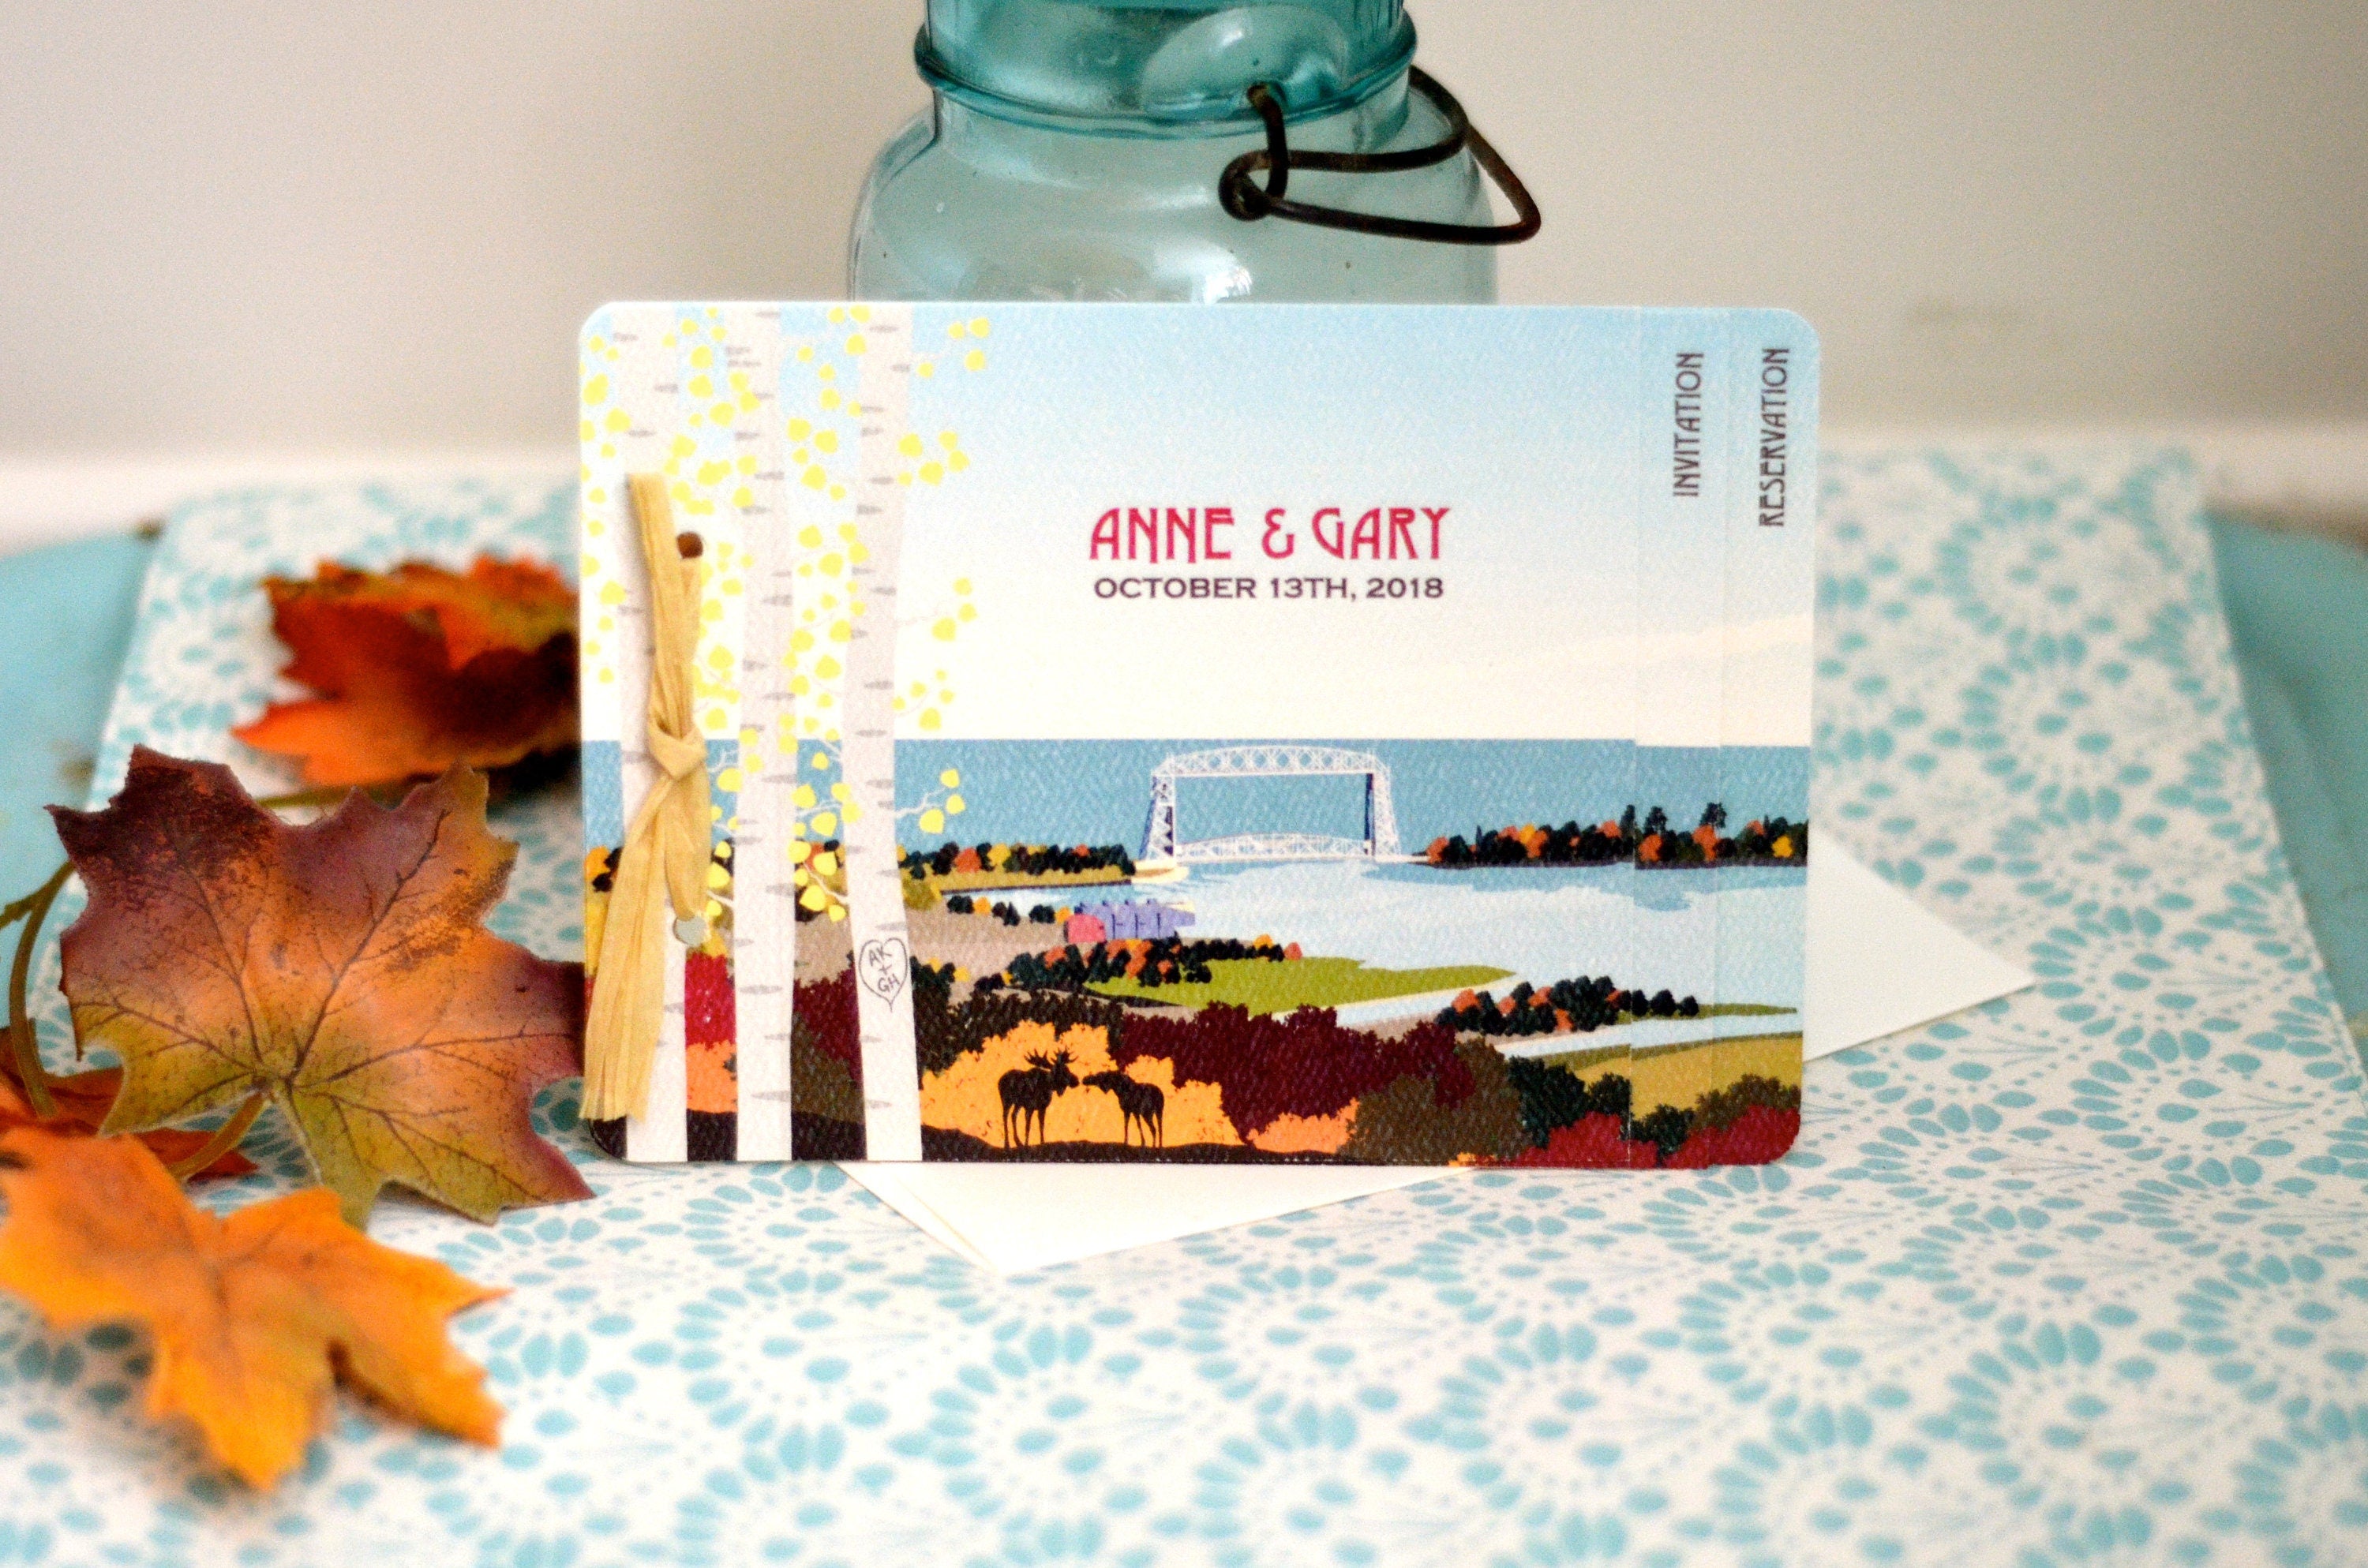 Duluth Minnesota Fall Lake with Birch Trees & Moose 3pg Livret Wedding Invitation Booklet with Attached Postcard RSVP